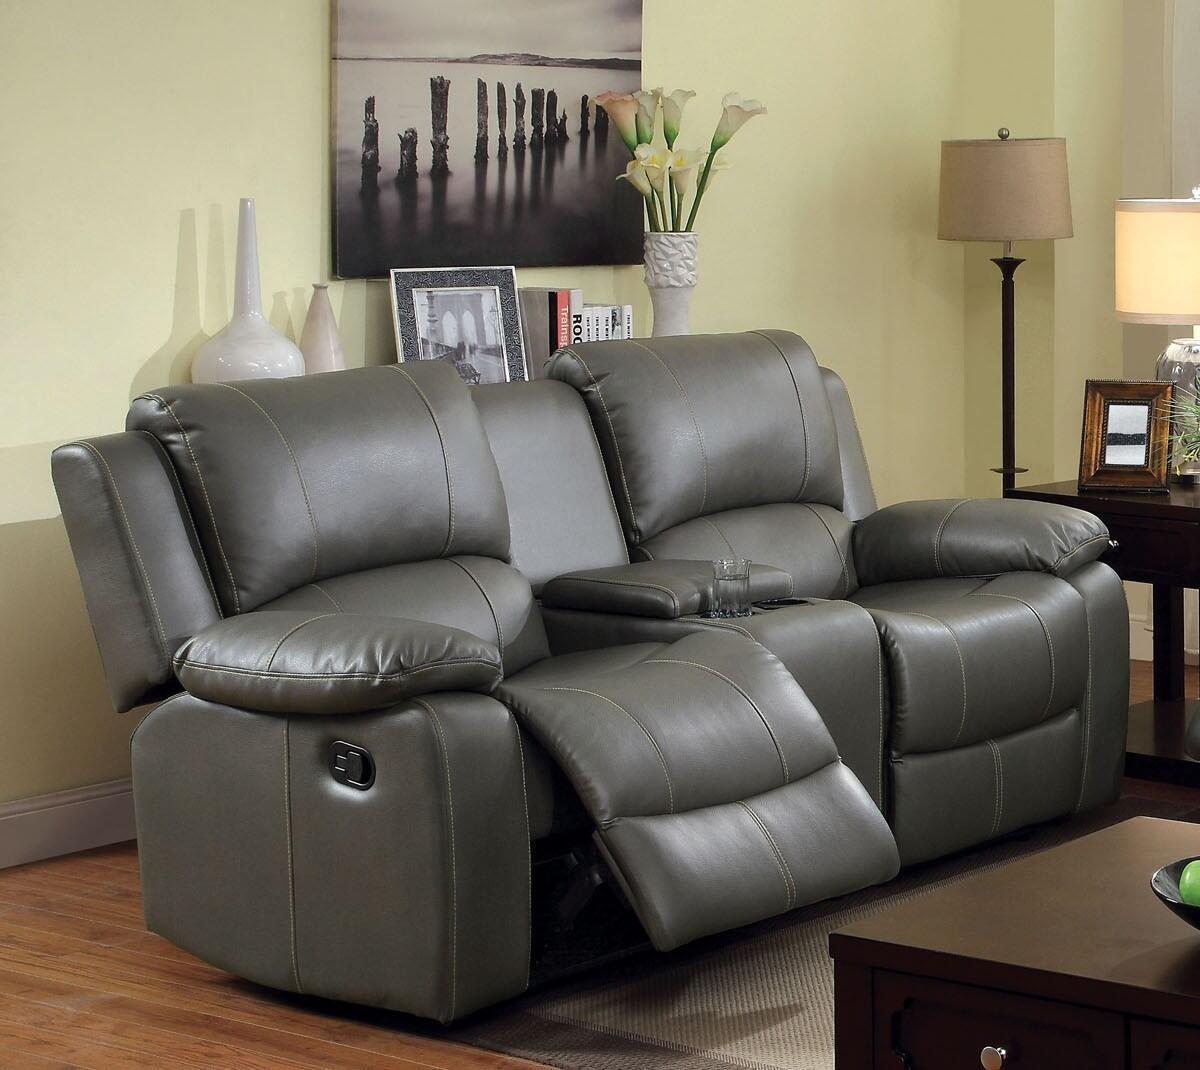 

    
Furniture of America CM6326-3PC Sarles Recliner Sofa Loveseat and Chair Gray CM6326-3PC
